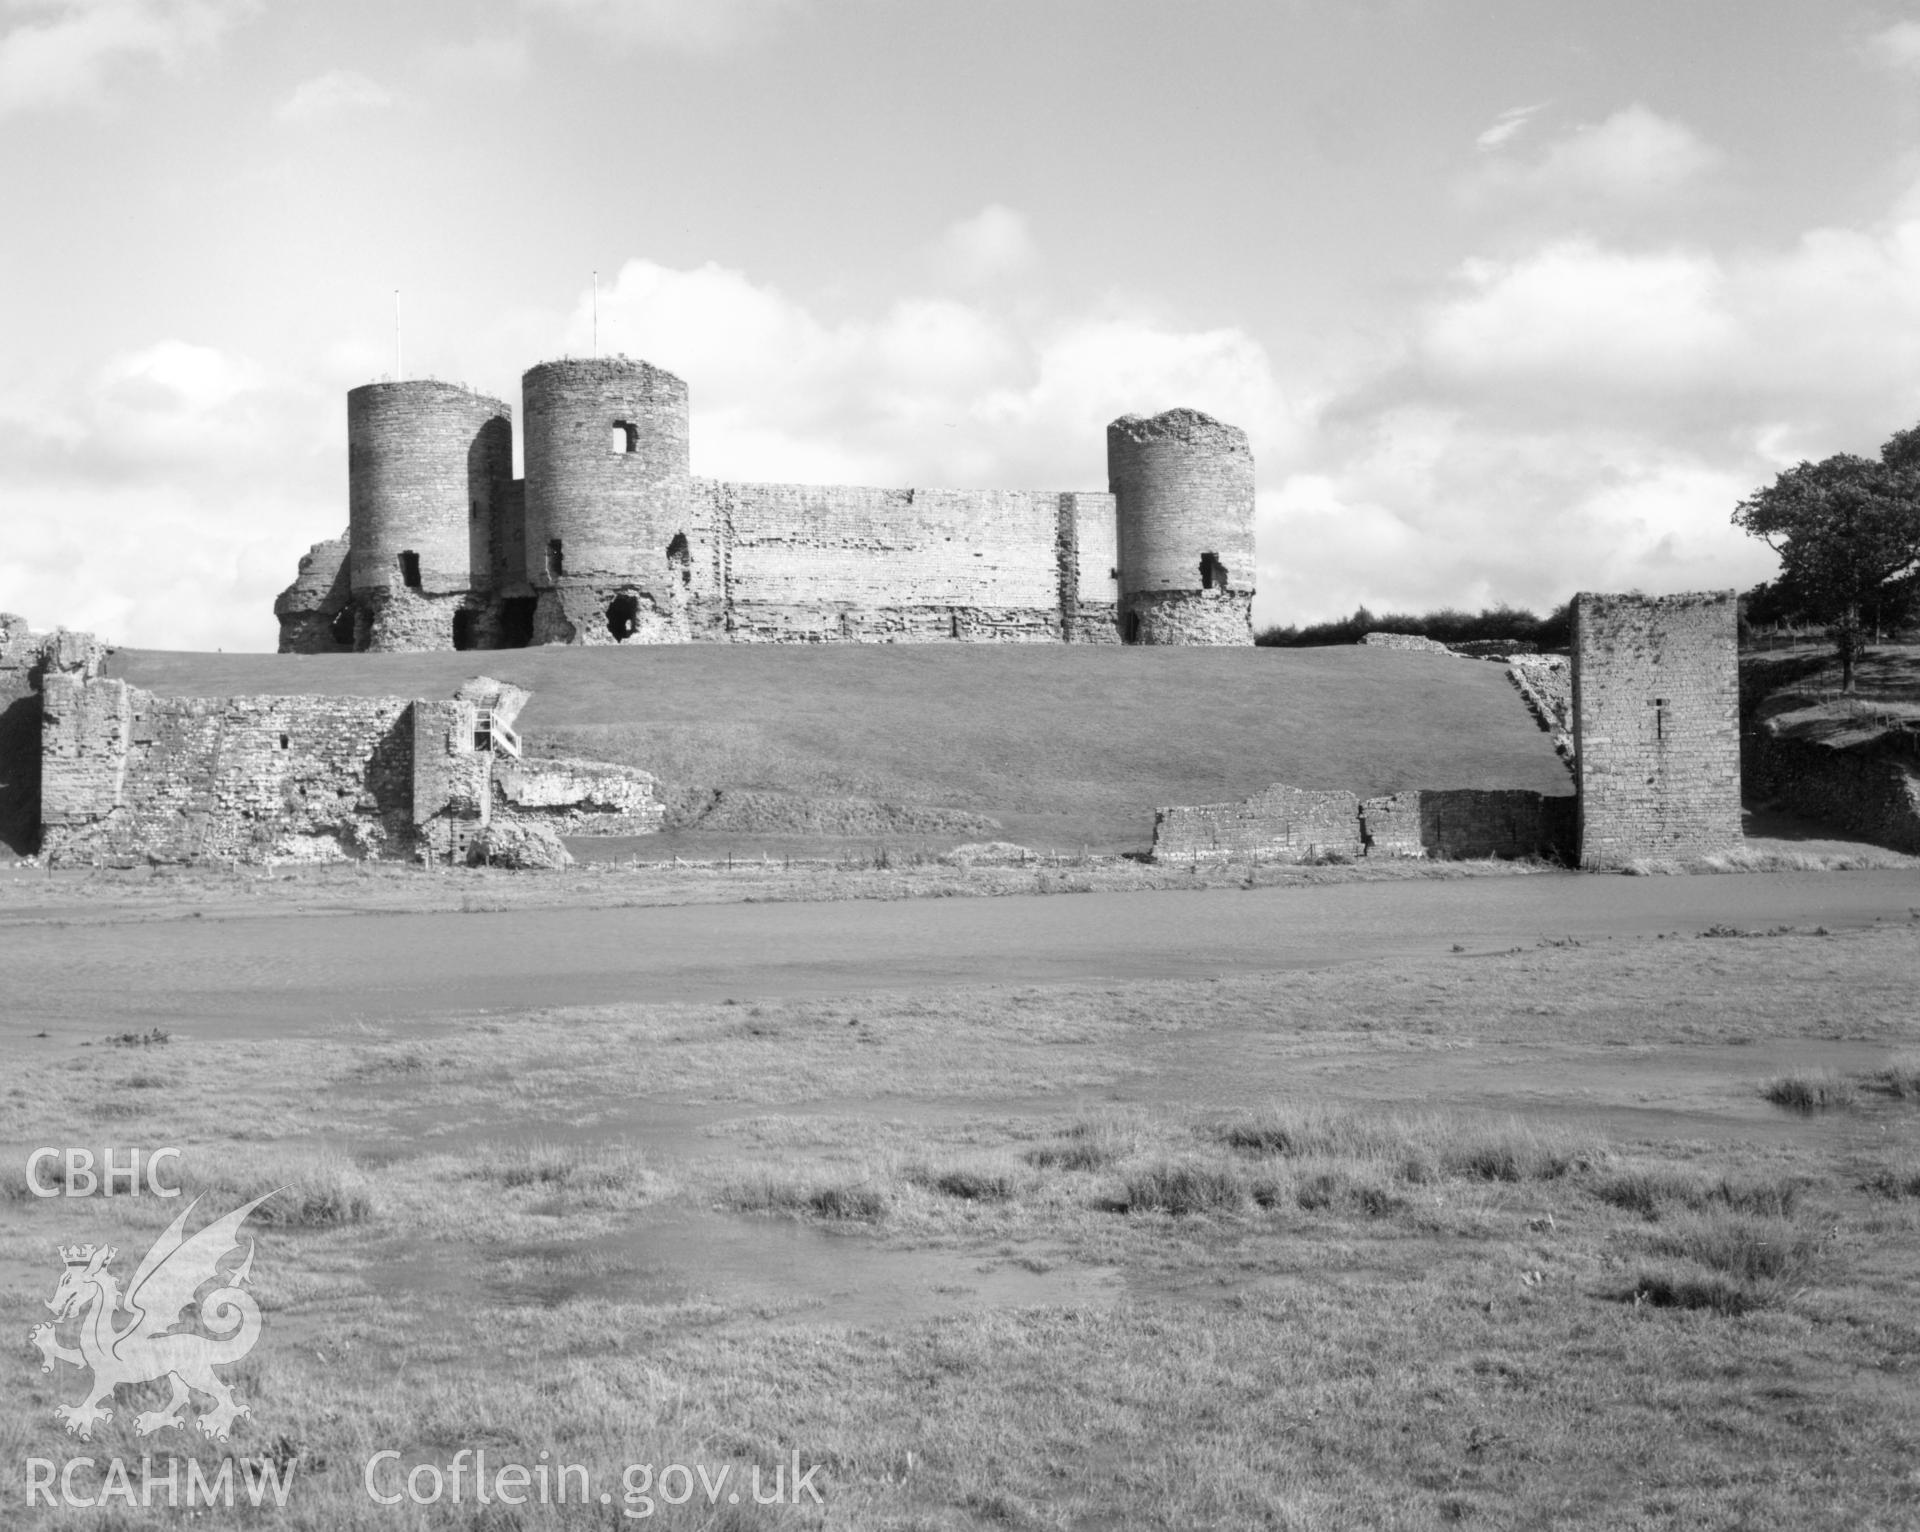 1 b/w print showing view of Rhuddlan castle, collated by the former Central Office of Information.